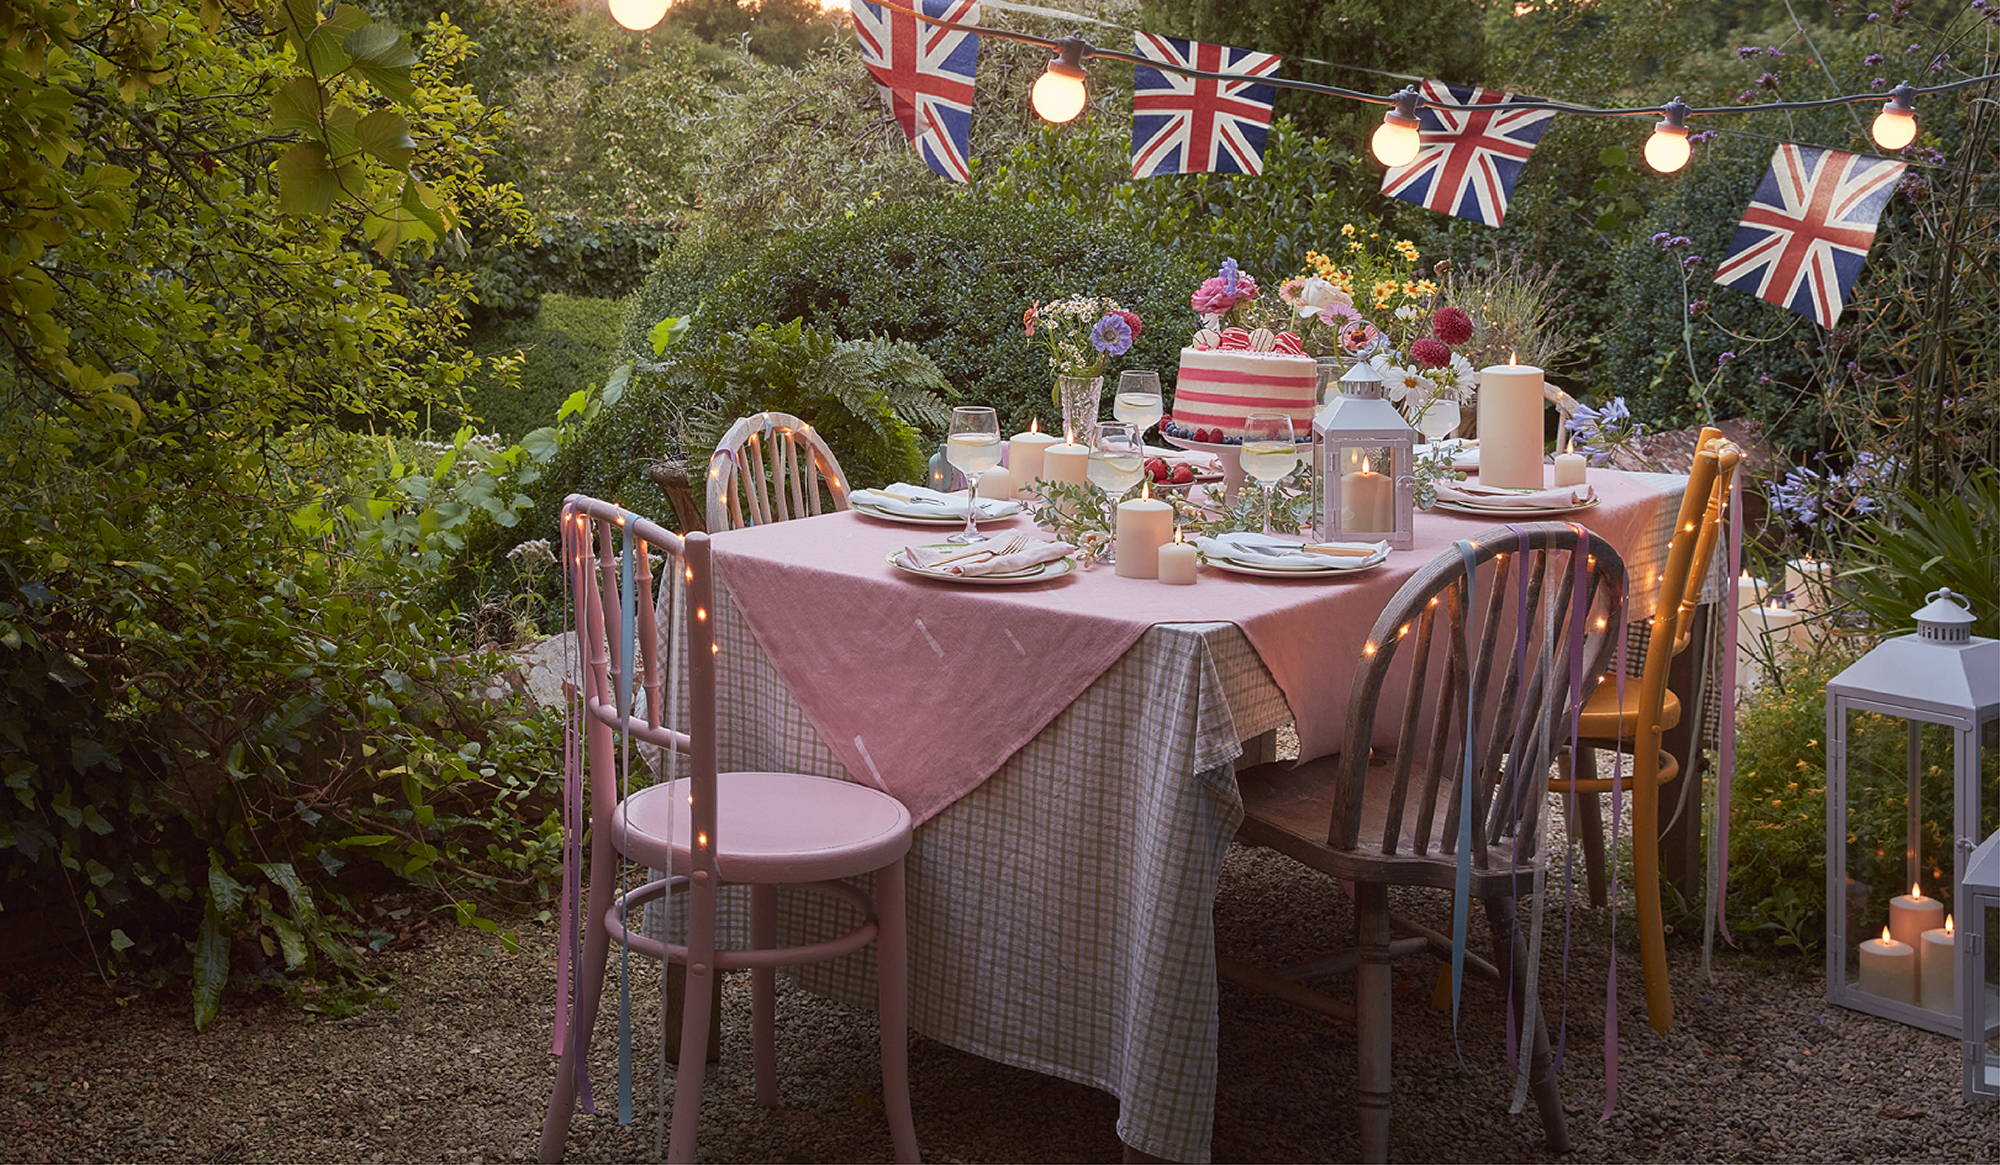 An outdoor coronation garden party with festoon lights, LED candles, Union Jack bunting and micro fairy lights.